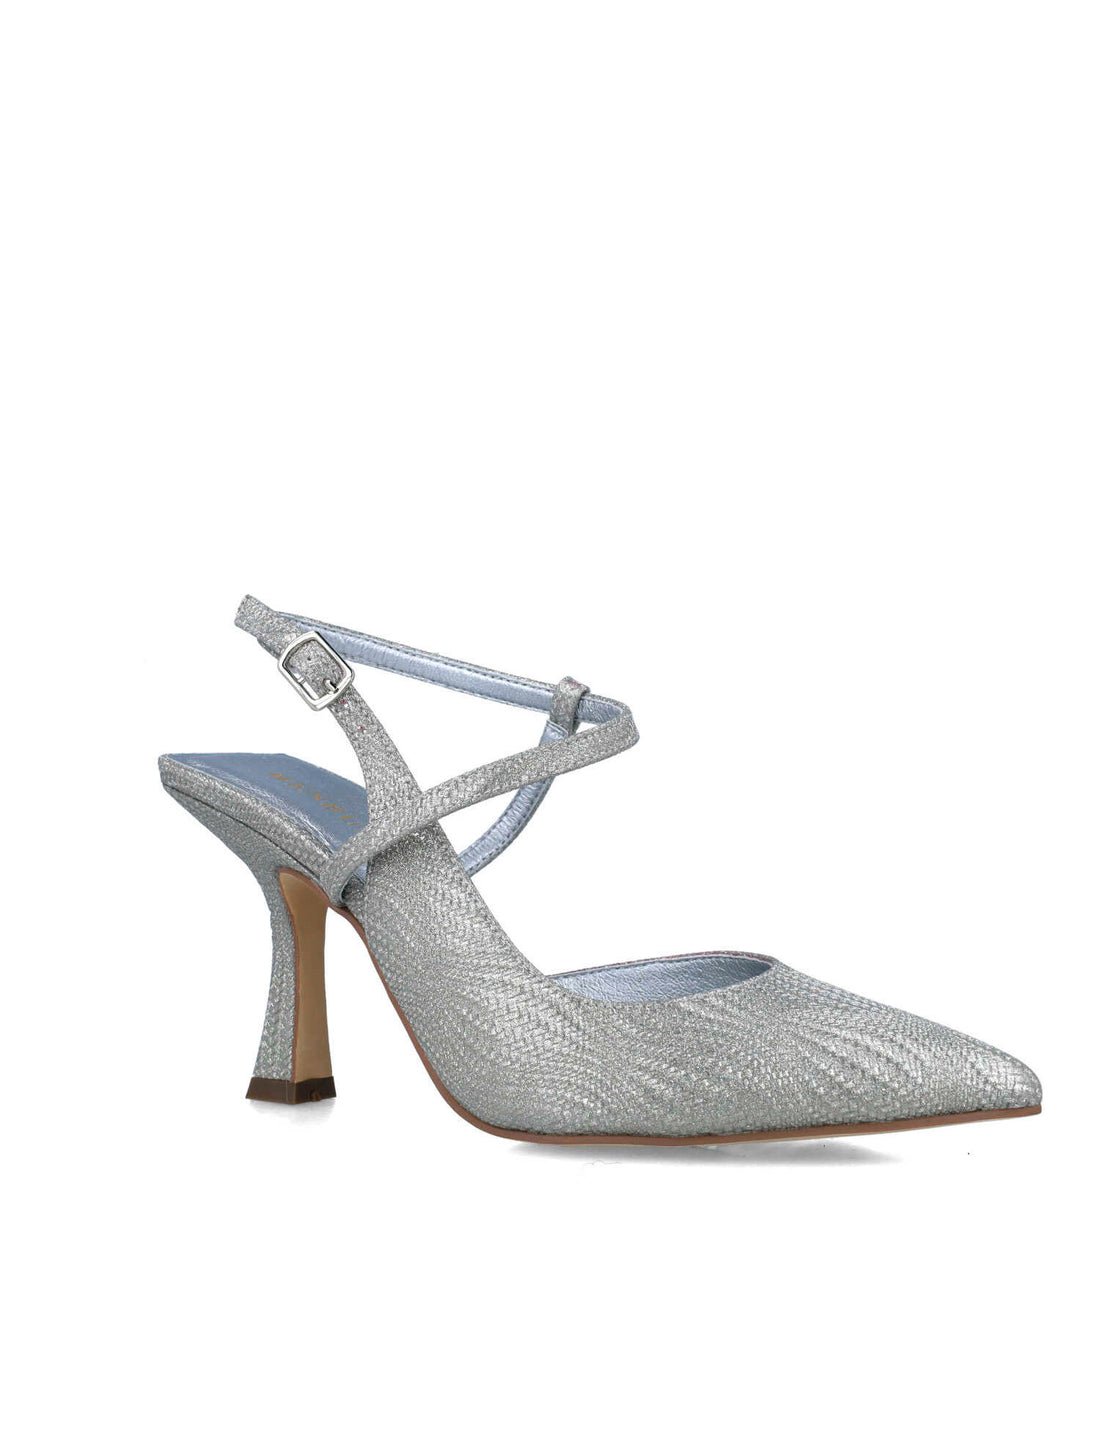 Shimmery Silver Pumps With Ankle Strap_25274_09_02